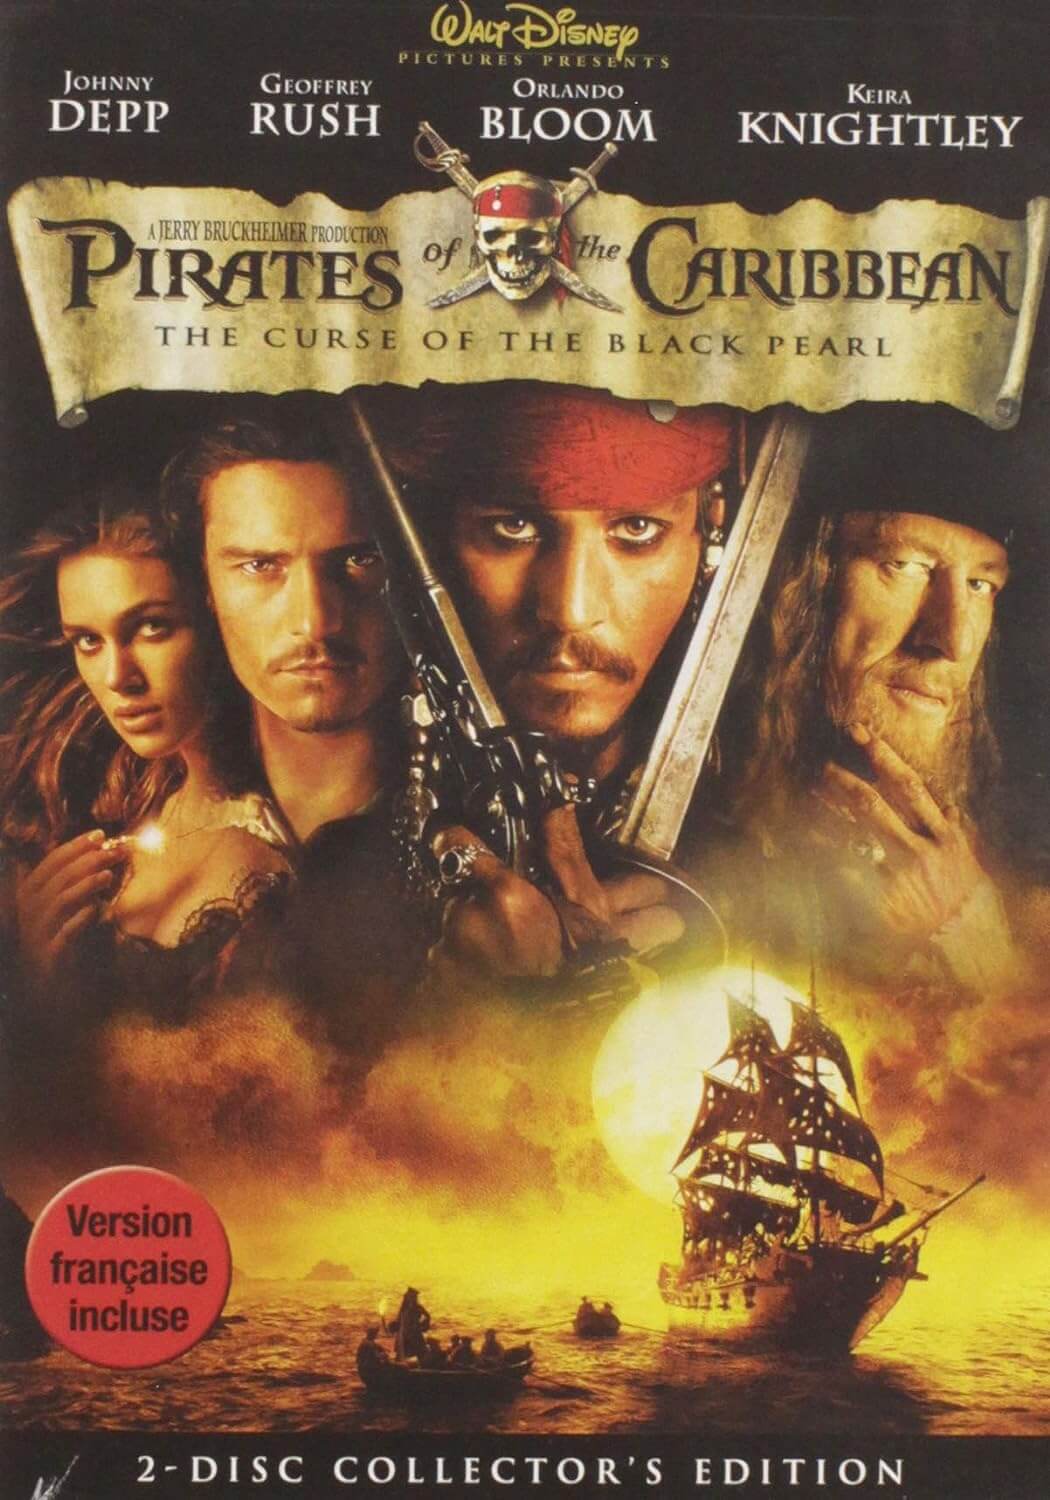 “Pirates of the Caribbean: The Curse of the Black Pearl” (2003)